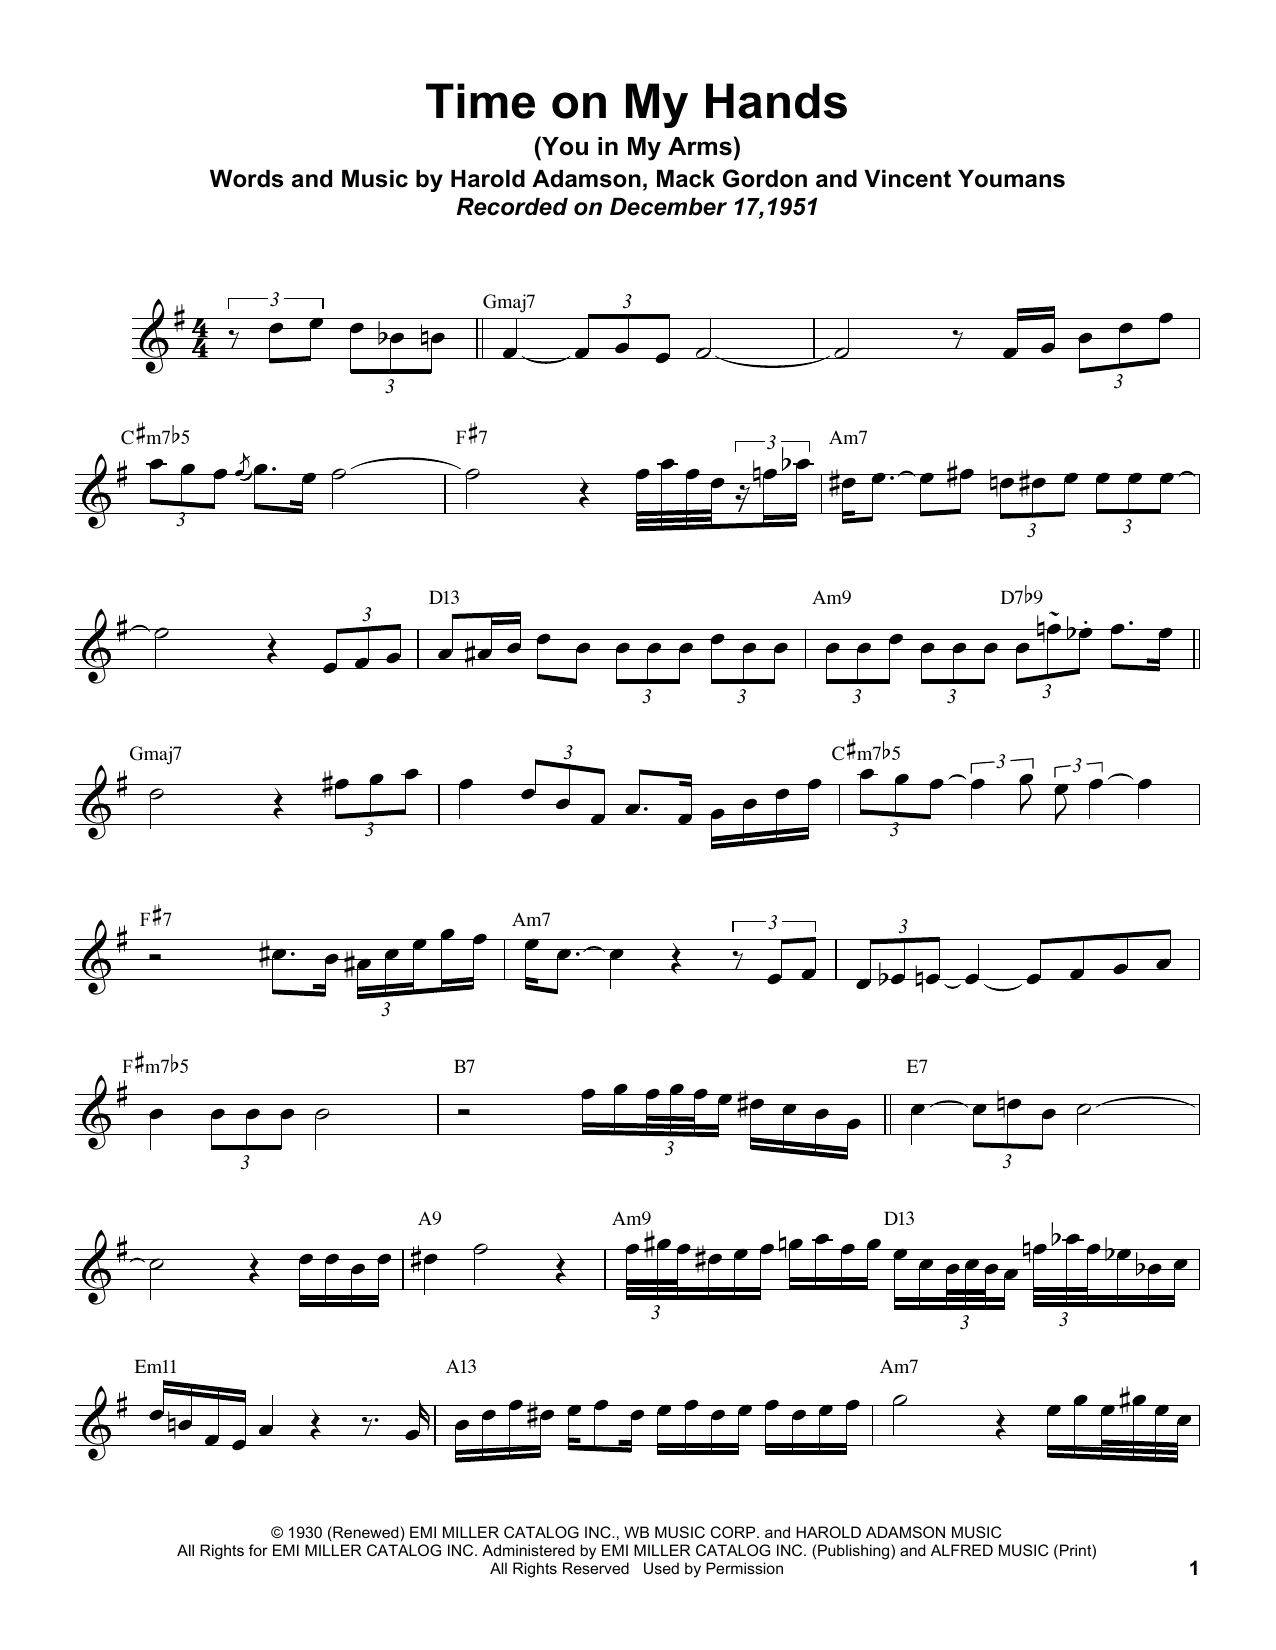 Download Sonny Rollins Time On My Hands (You In My Arms) Sheet Music